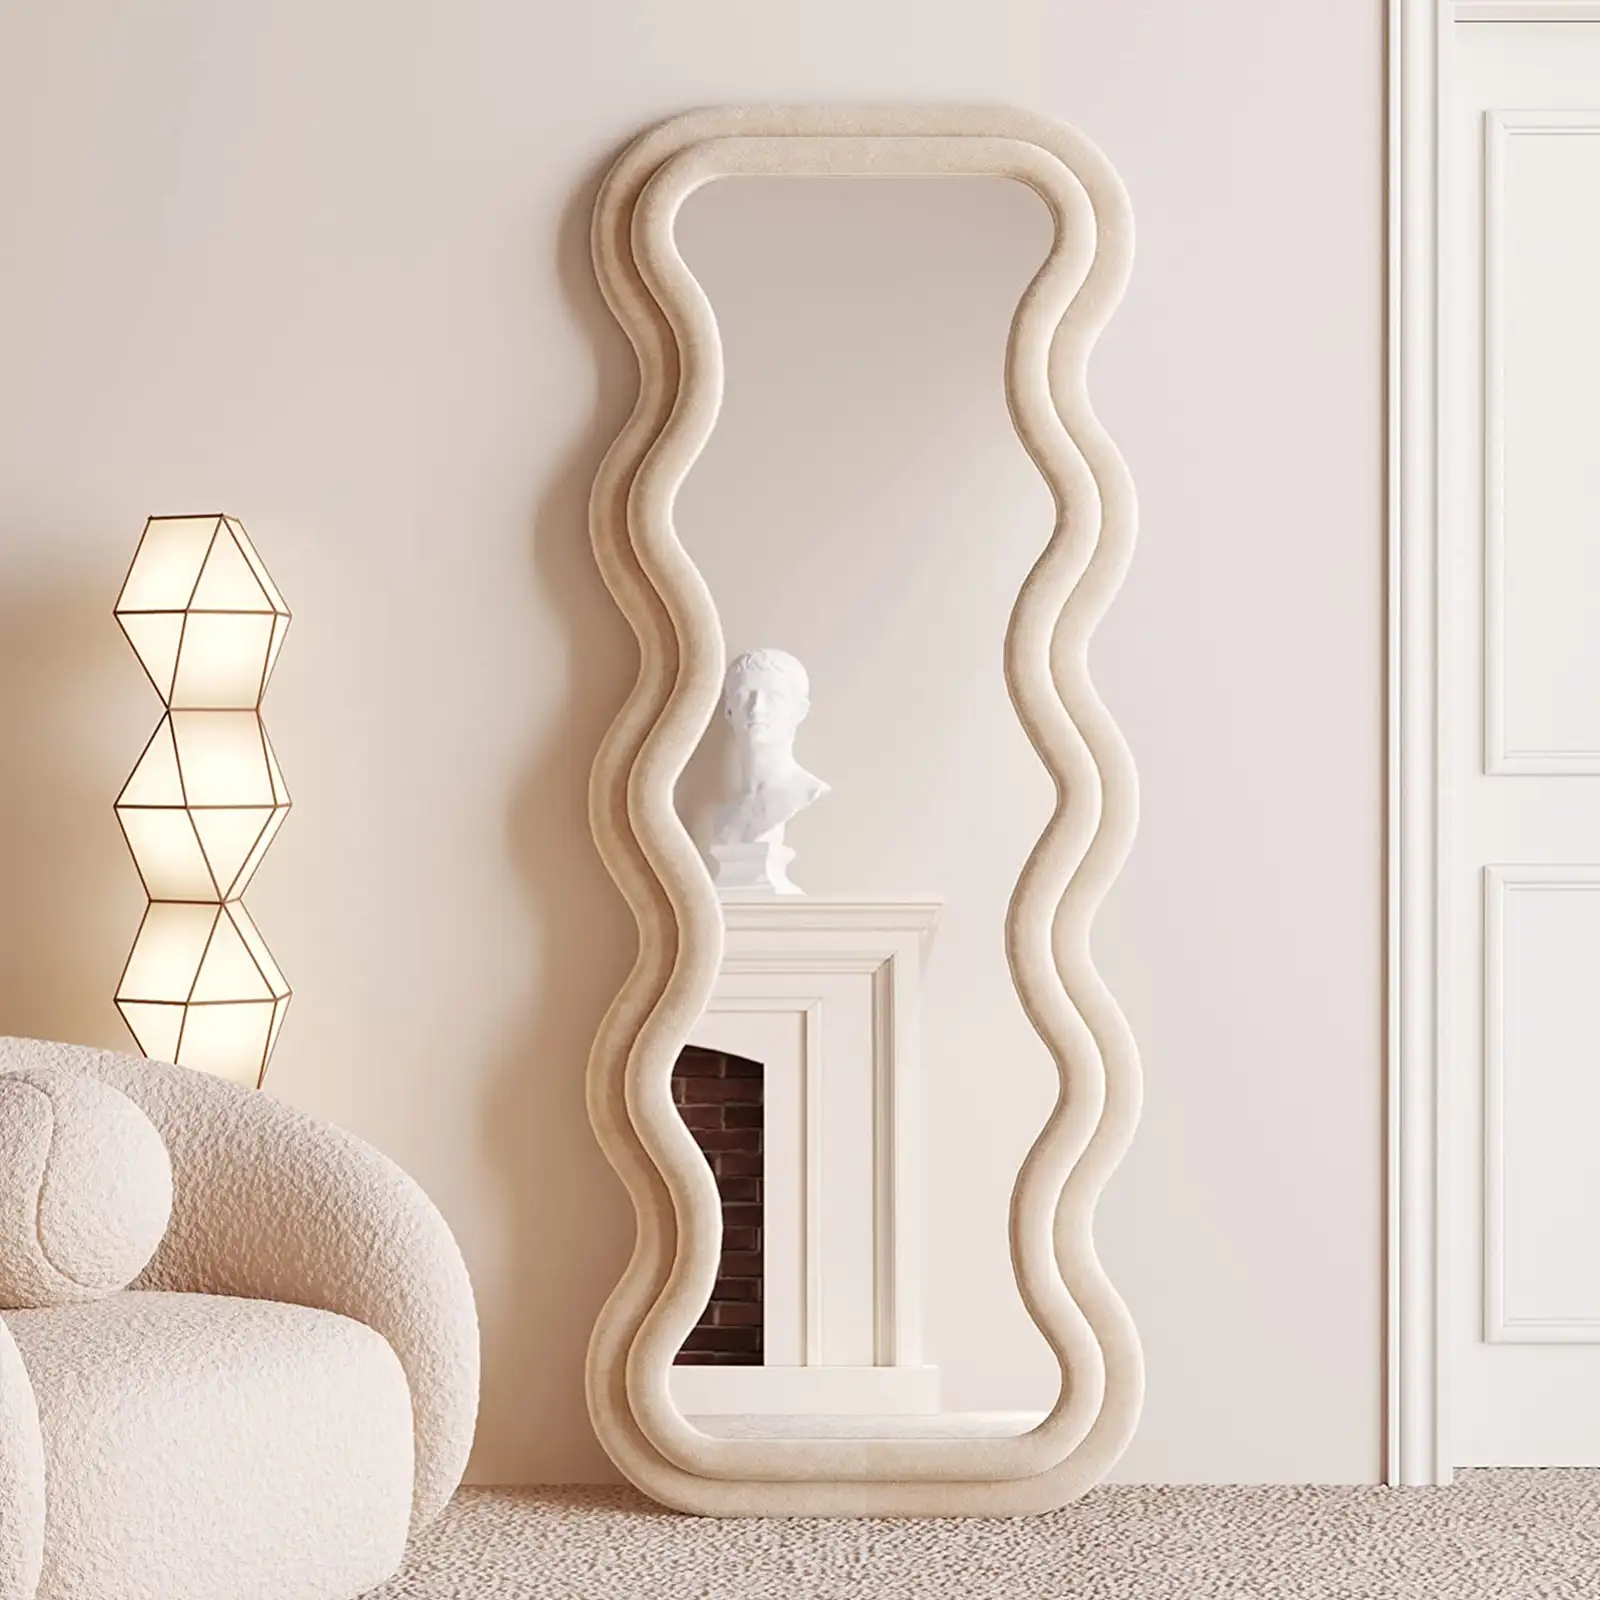 Full Length Mirror 63"x24", Irregular Wavy Mirror, Wave Arched Floor Mirror, Wall Mirror Standing Hanging or Leaning Against Wall for Bedroom, Flannel Wrapped Wooden Frame